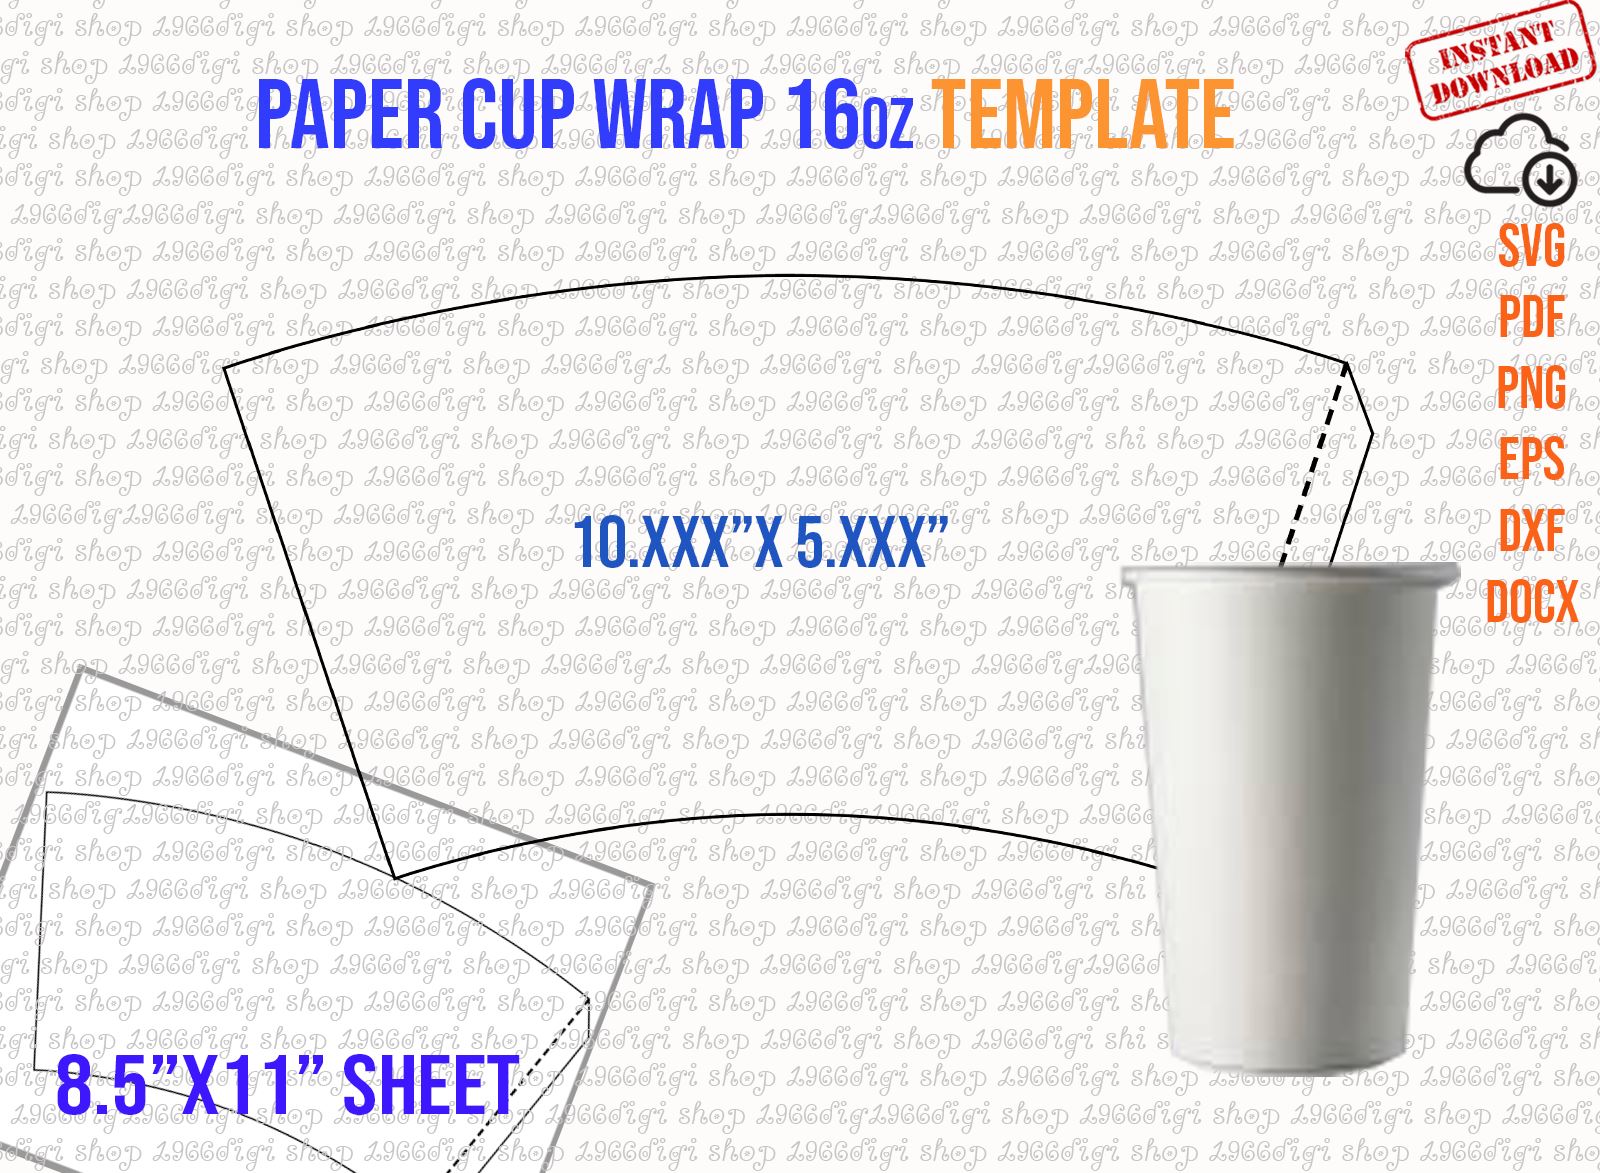 16oz Colster Can Template Full Wrap SVG PNG